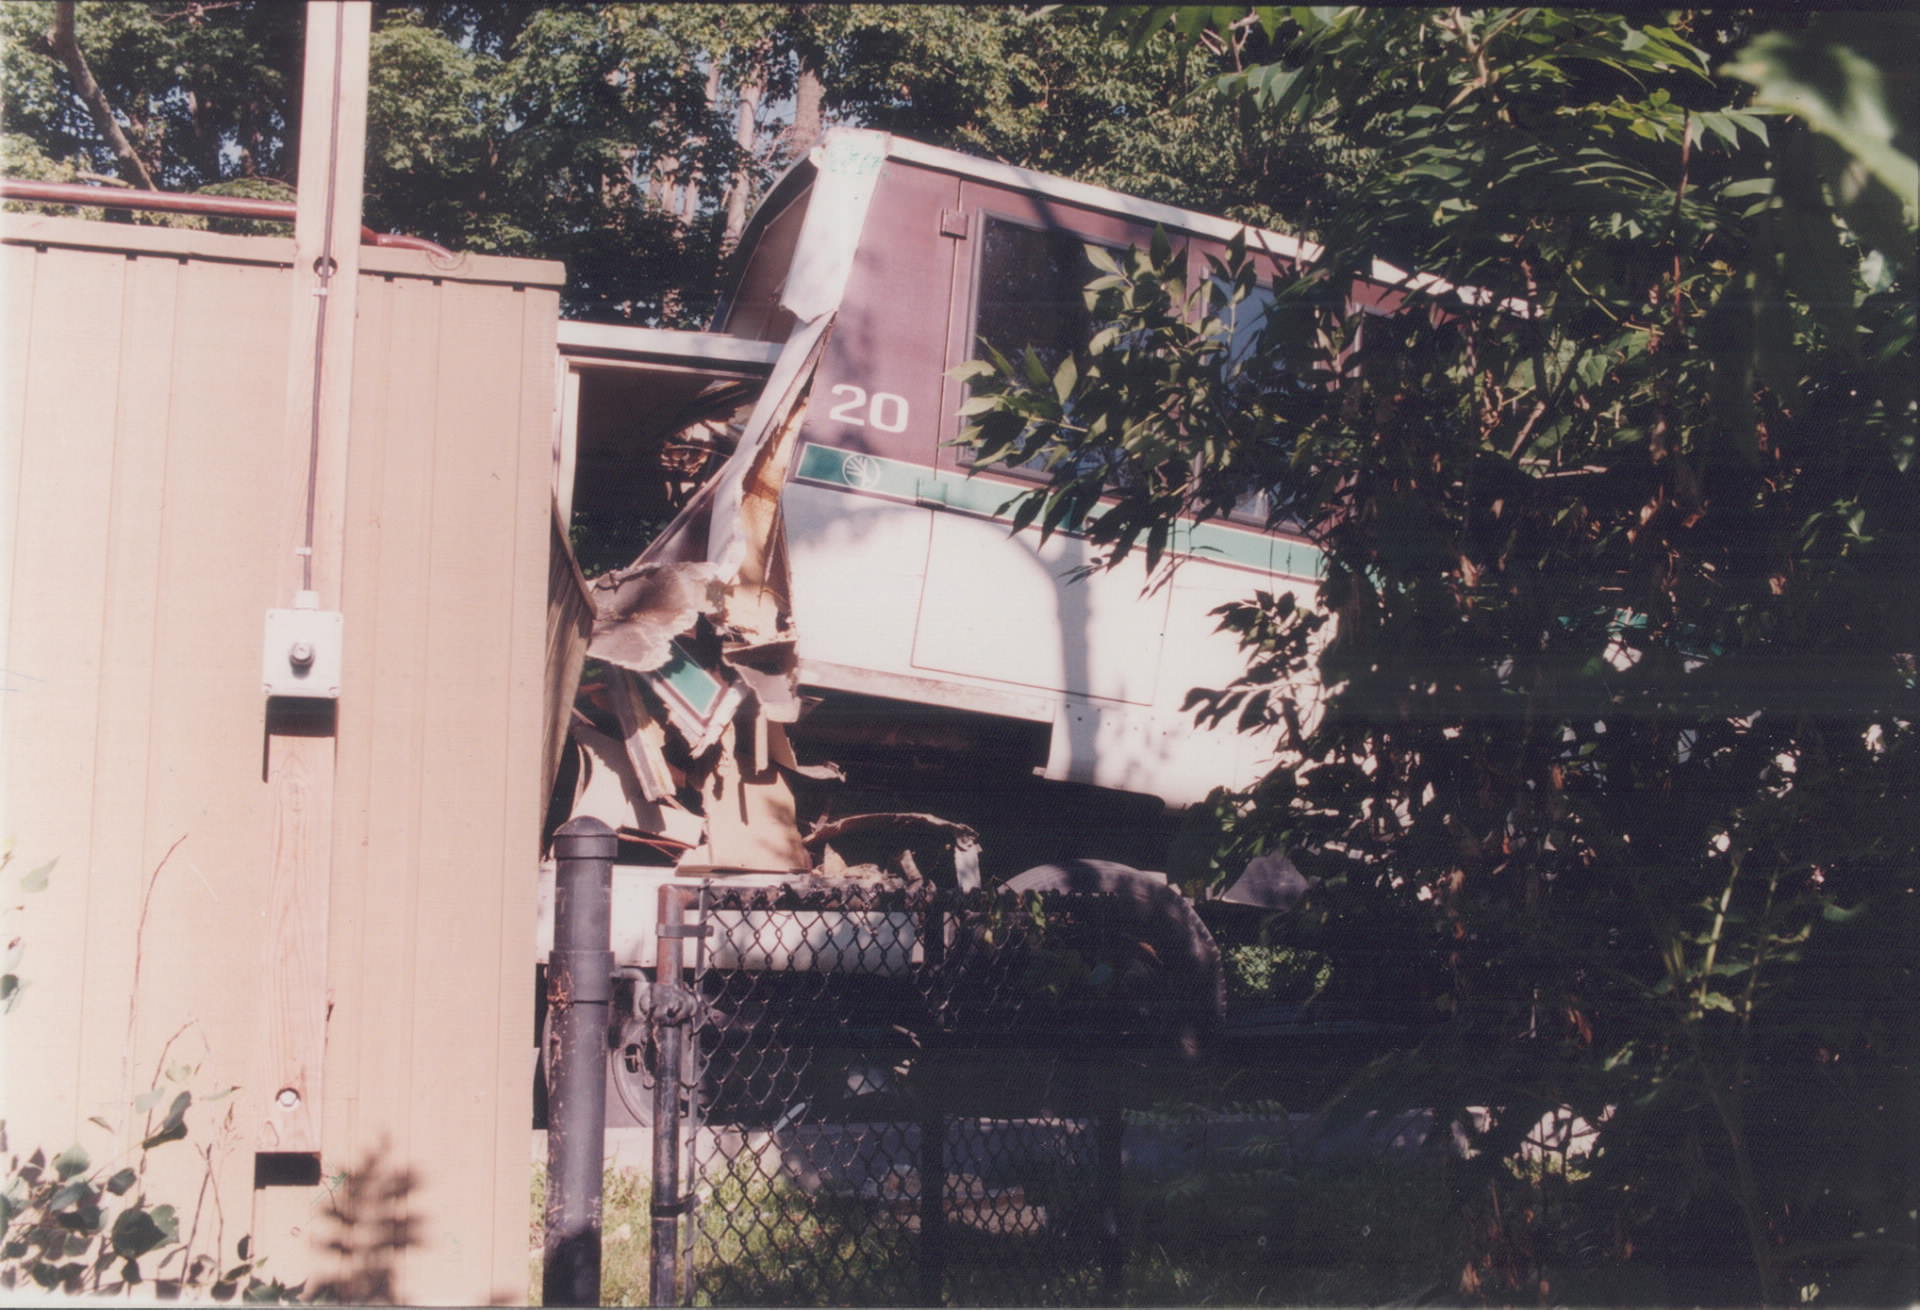 The rise and fall of Toronto’s zoo Monorail, 1994